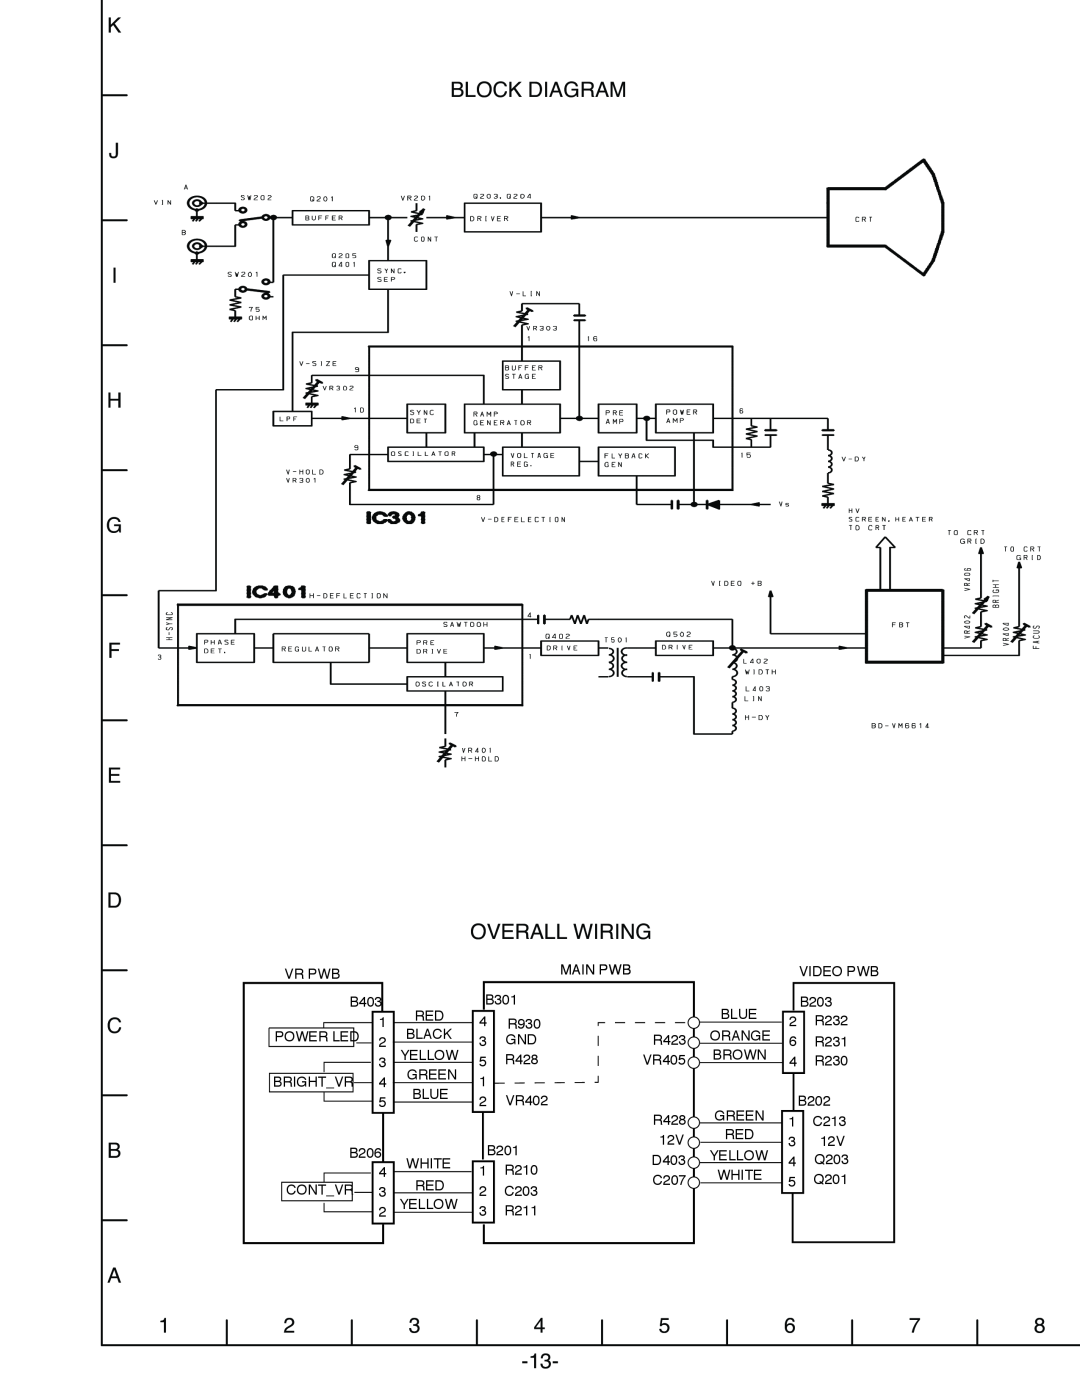 Sanyo VM-6614, VM-6615P specifications K Block Diagram J I H G F E D Overall Wiring, CONTVR 3 RED 2 YELLOW 